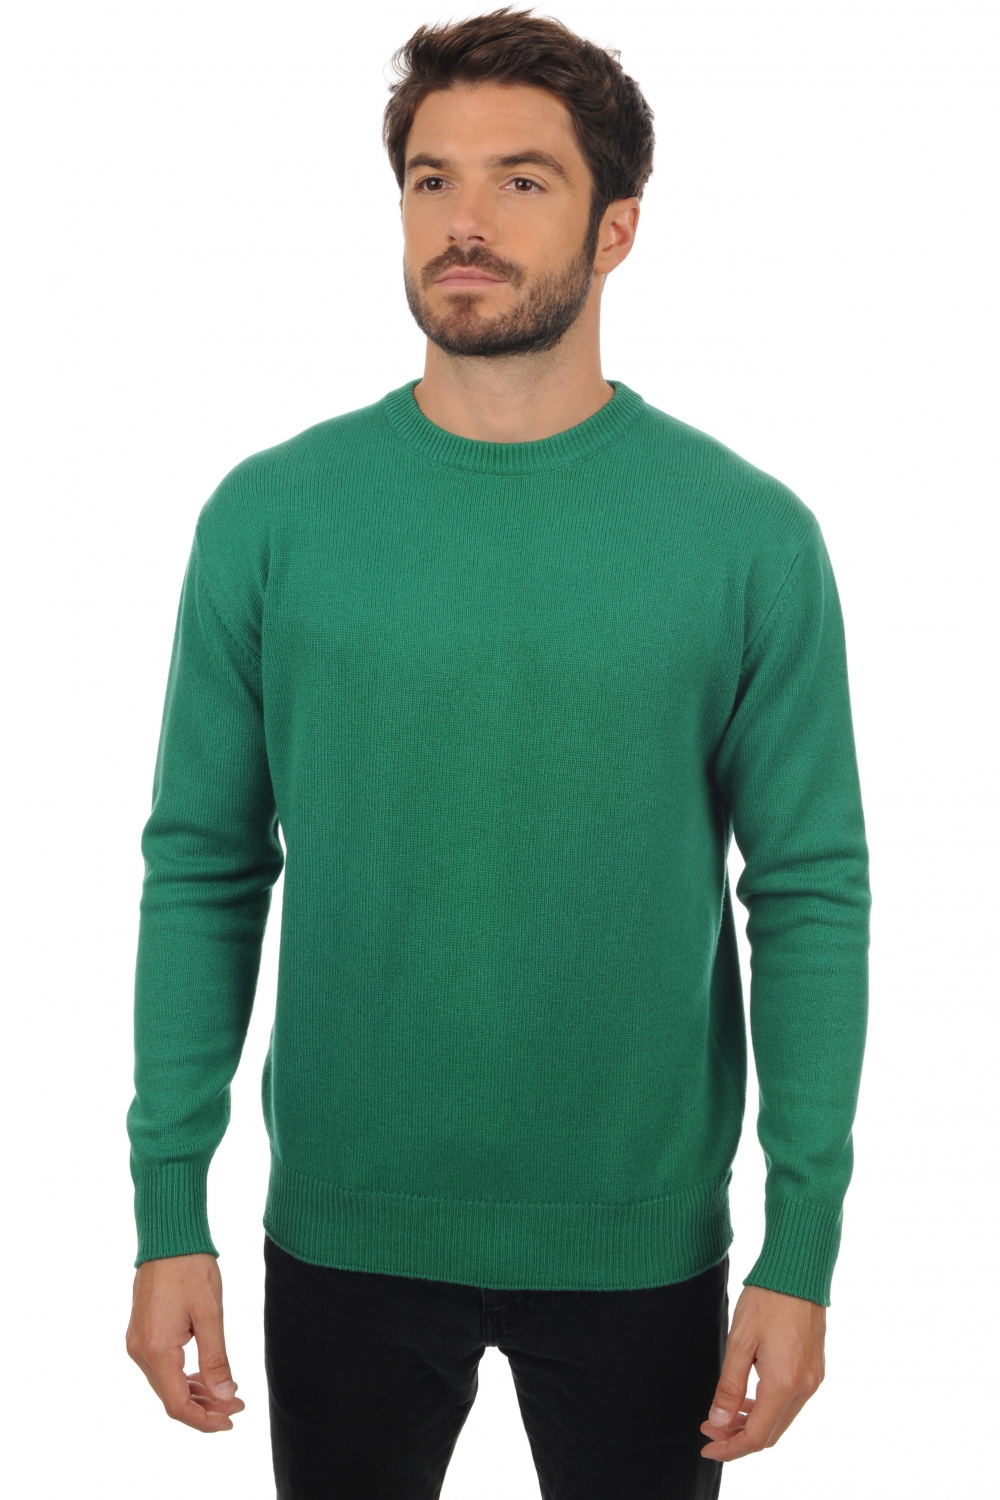 Cachemire pull homme col rond nestor 4f vert anglais l